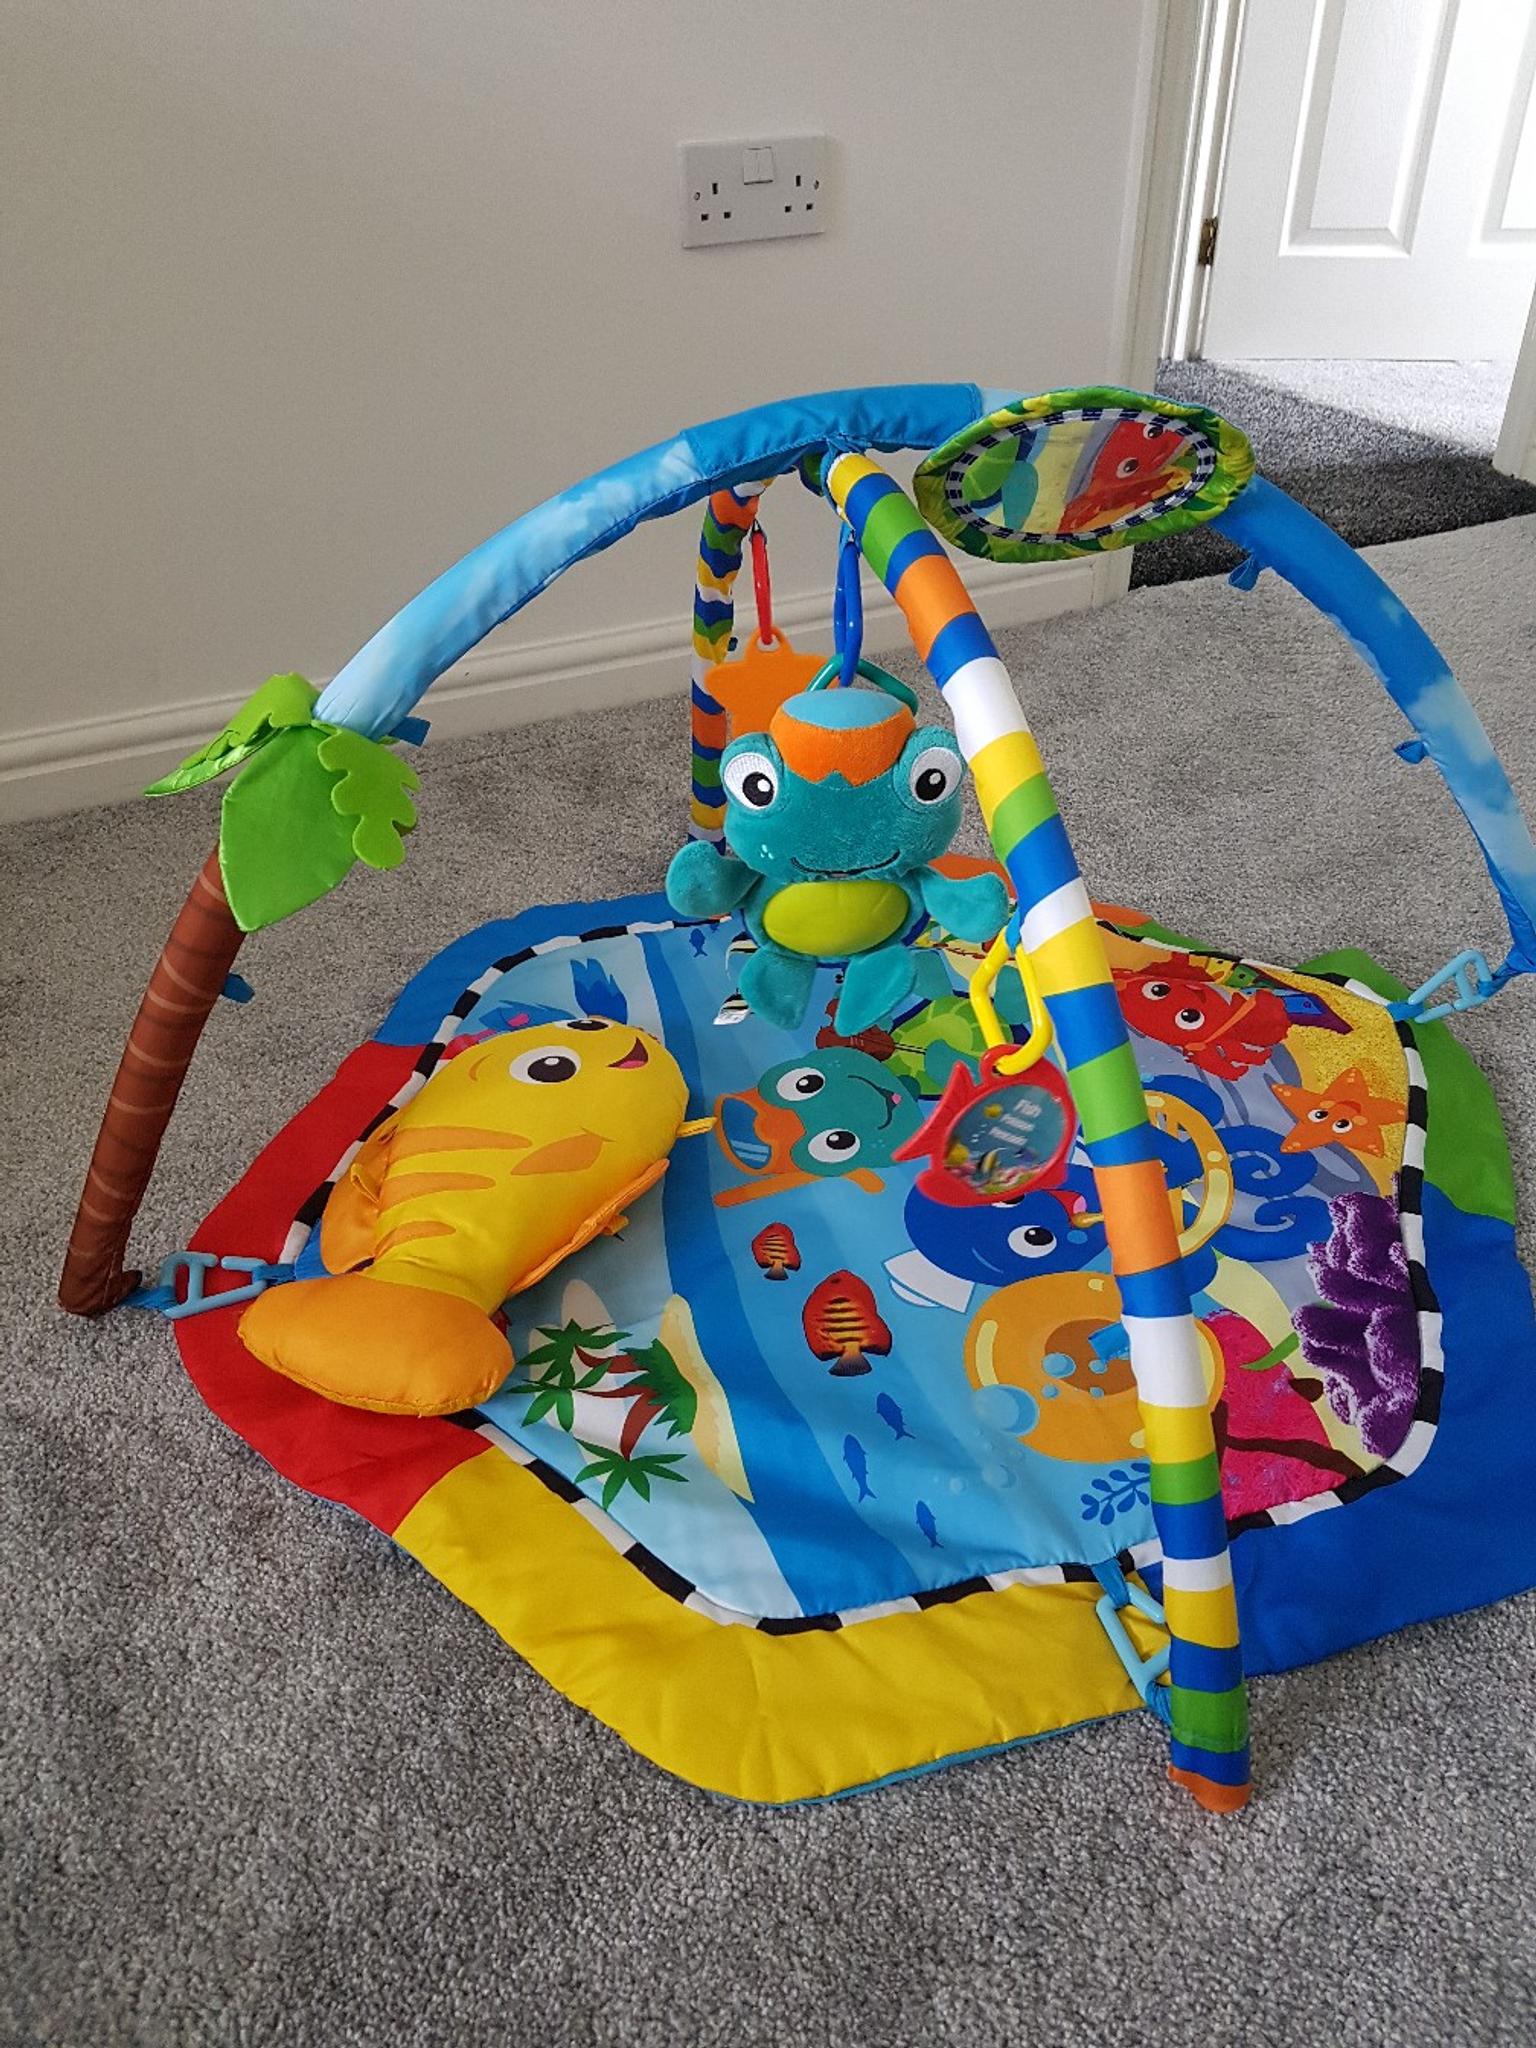 Baby Play Gym Baby Einstein In B43 Sandwell For 5 00 For Sale